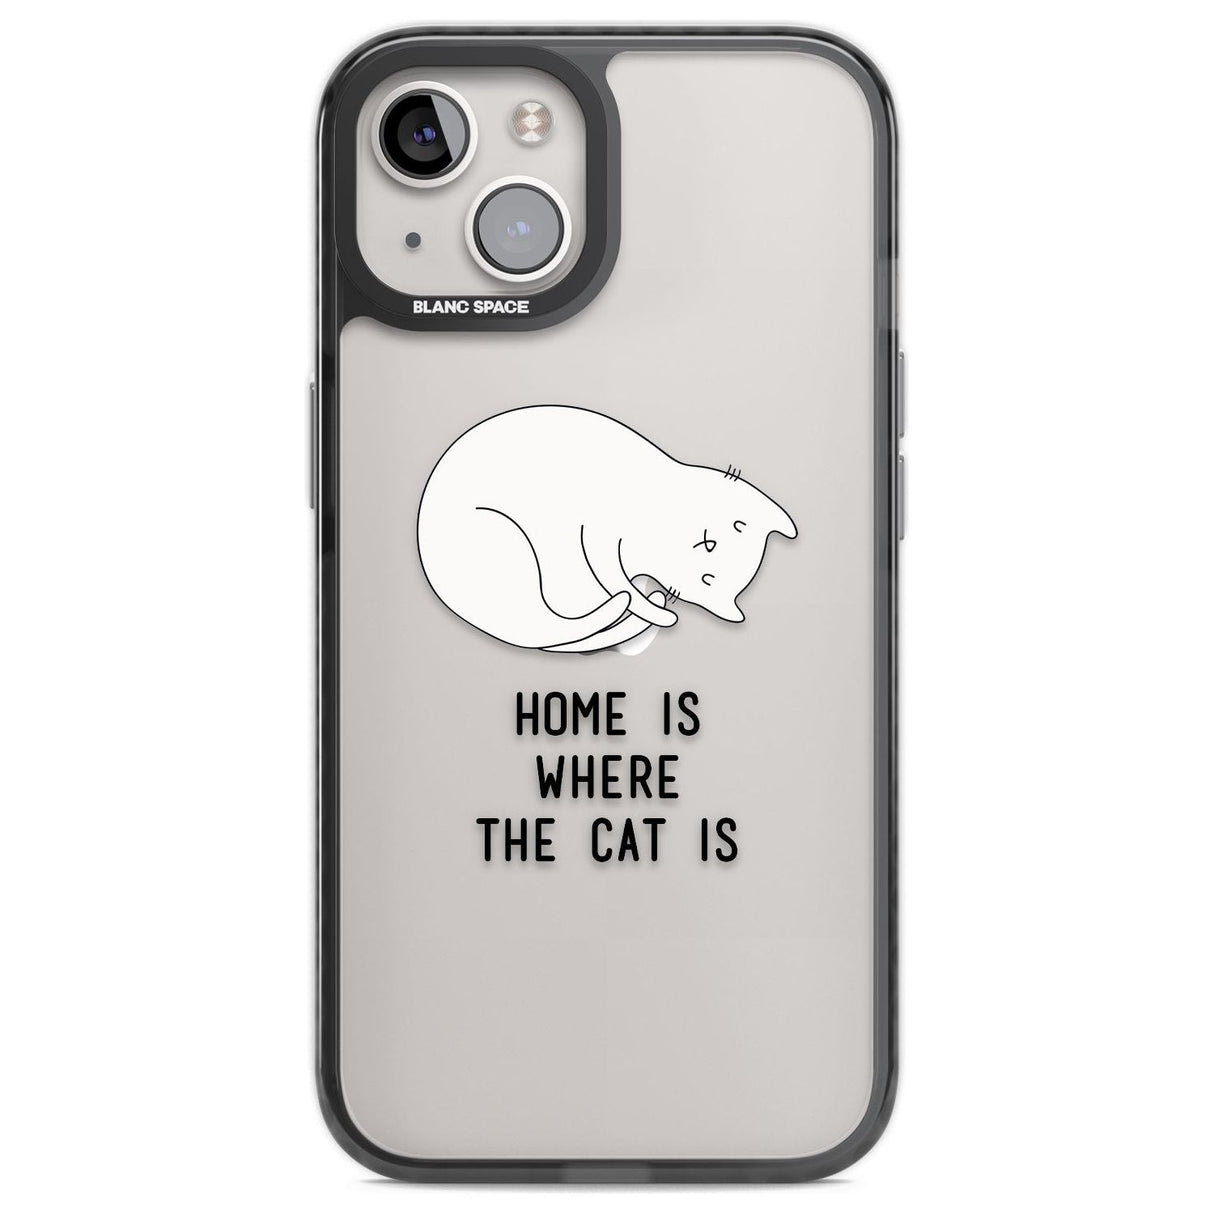 Home Is Where the Cat is Phone Case iPhone 12 / Black Impact Case,iPhone 13 / Black Impact Case,iPhone 12 Pro / Black Impact Case,iPhone 14 / Black Impact Case,iPhone 15 Plus / Black Impact Case,iPhone 15 / Black Impact Case Blanc Space